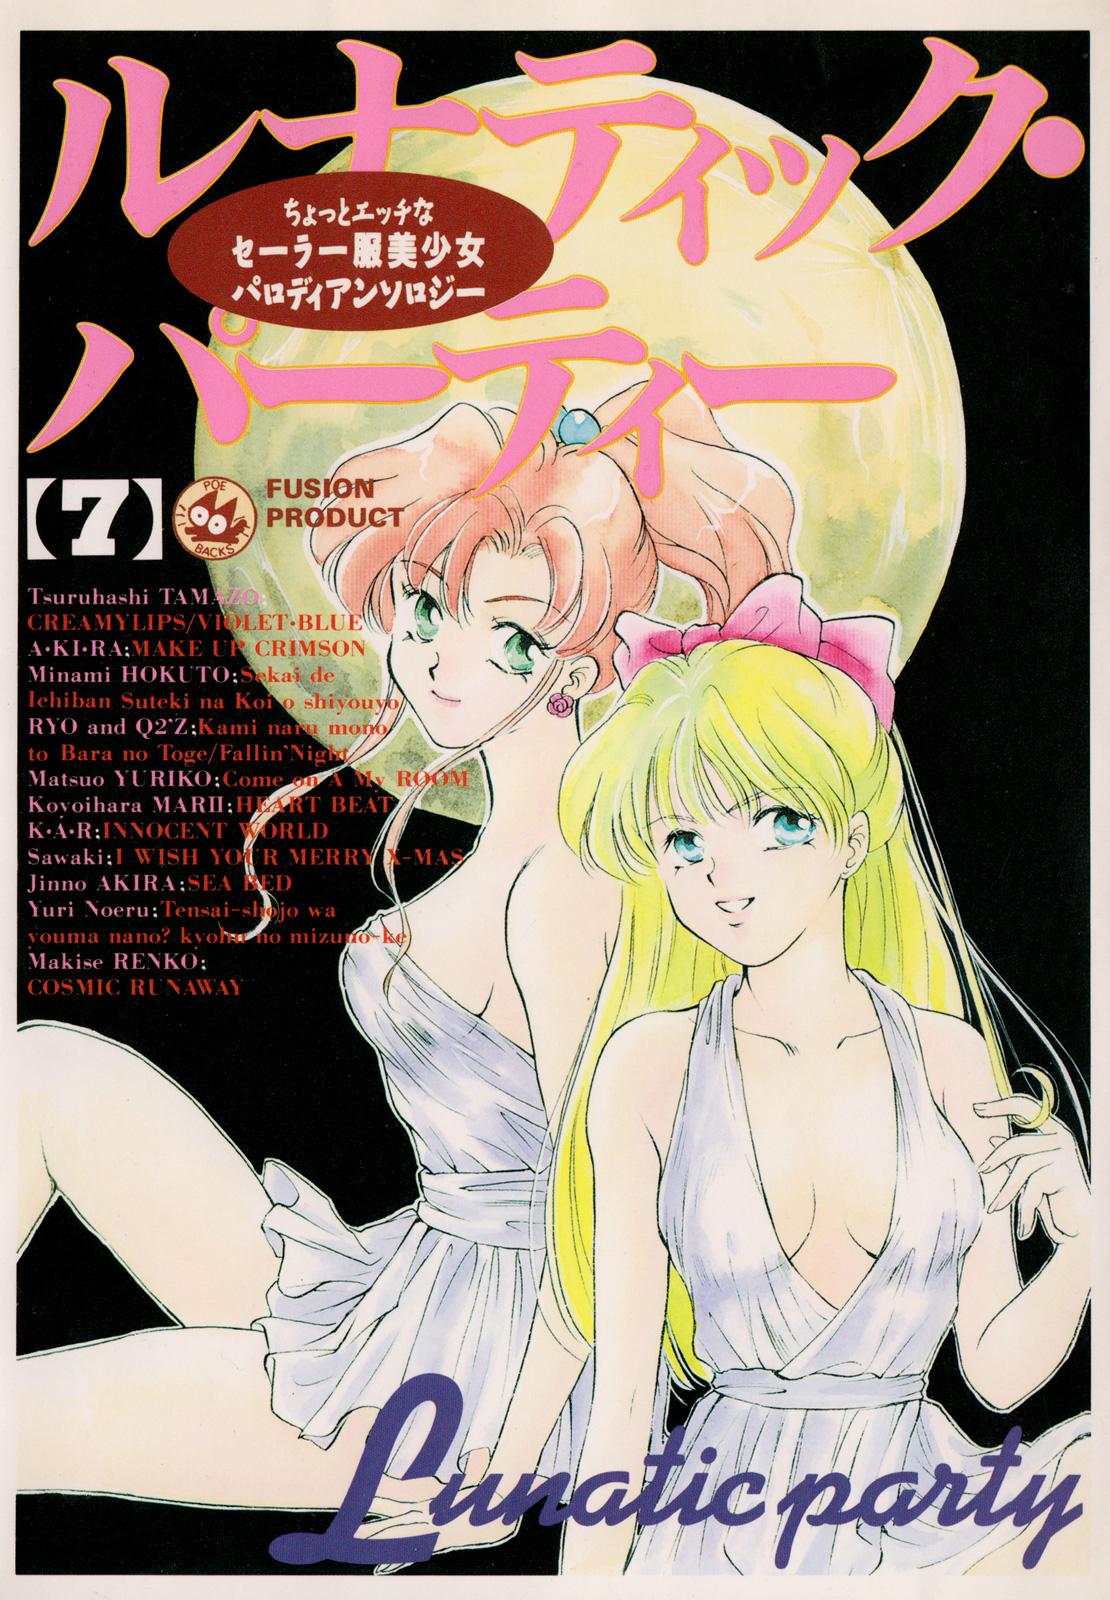 Love Lunatic Party 7 - Sailor moon Famosa - Page 1